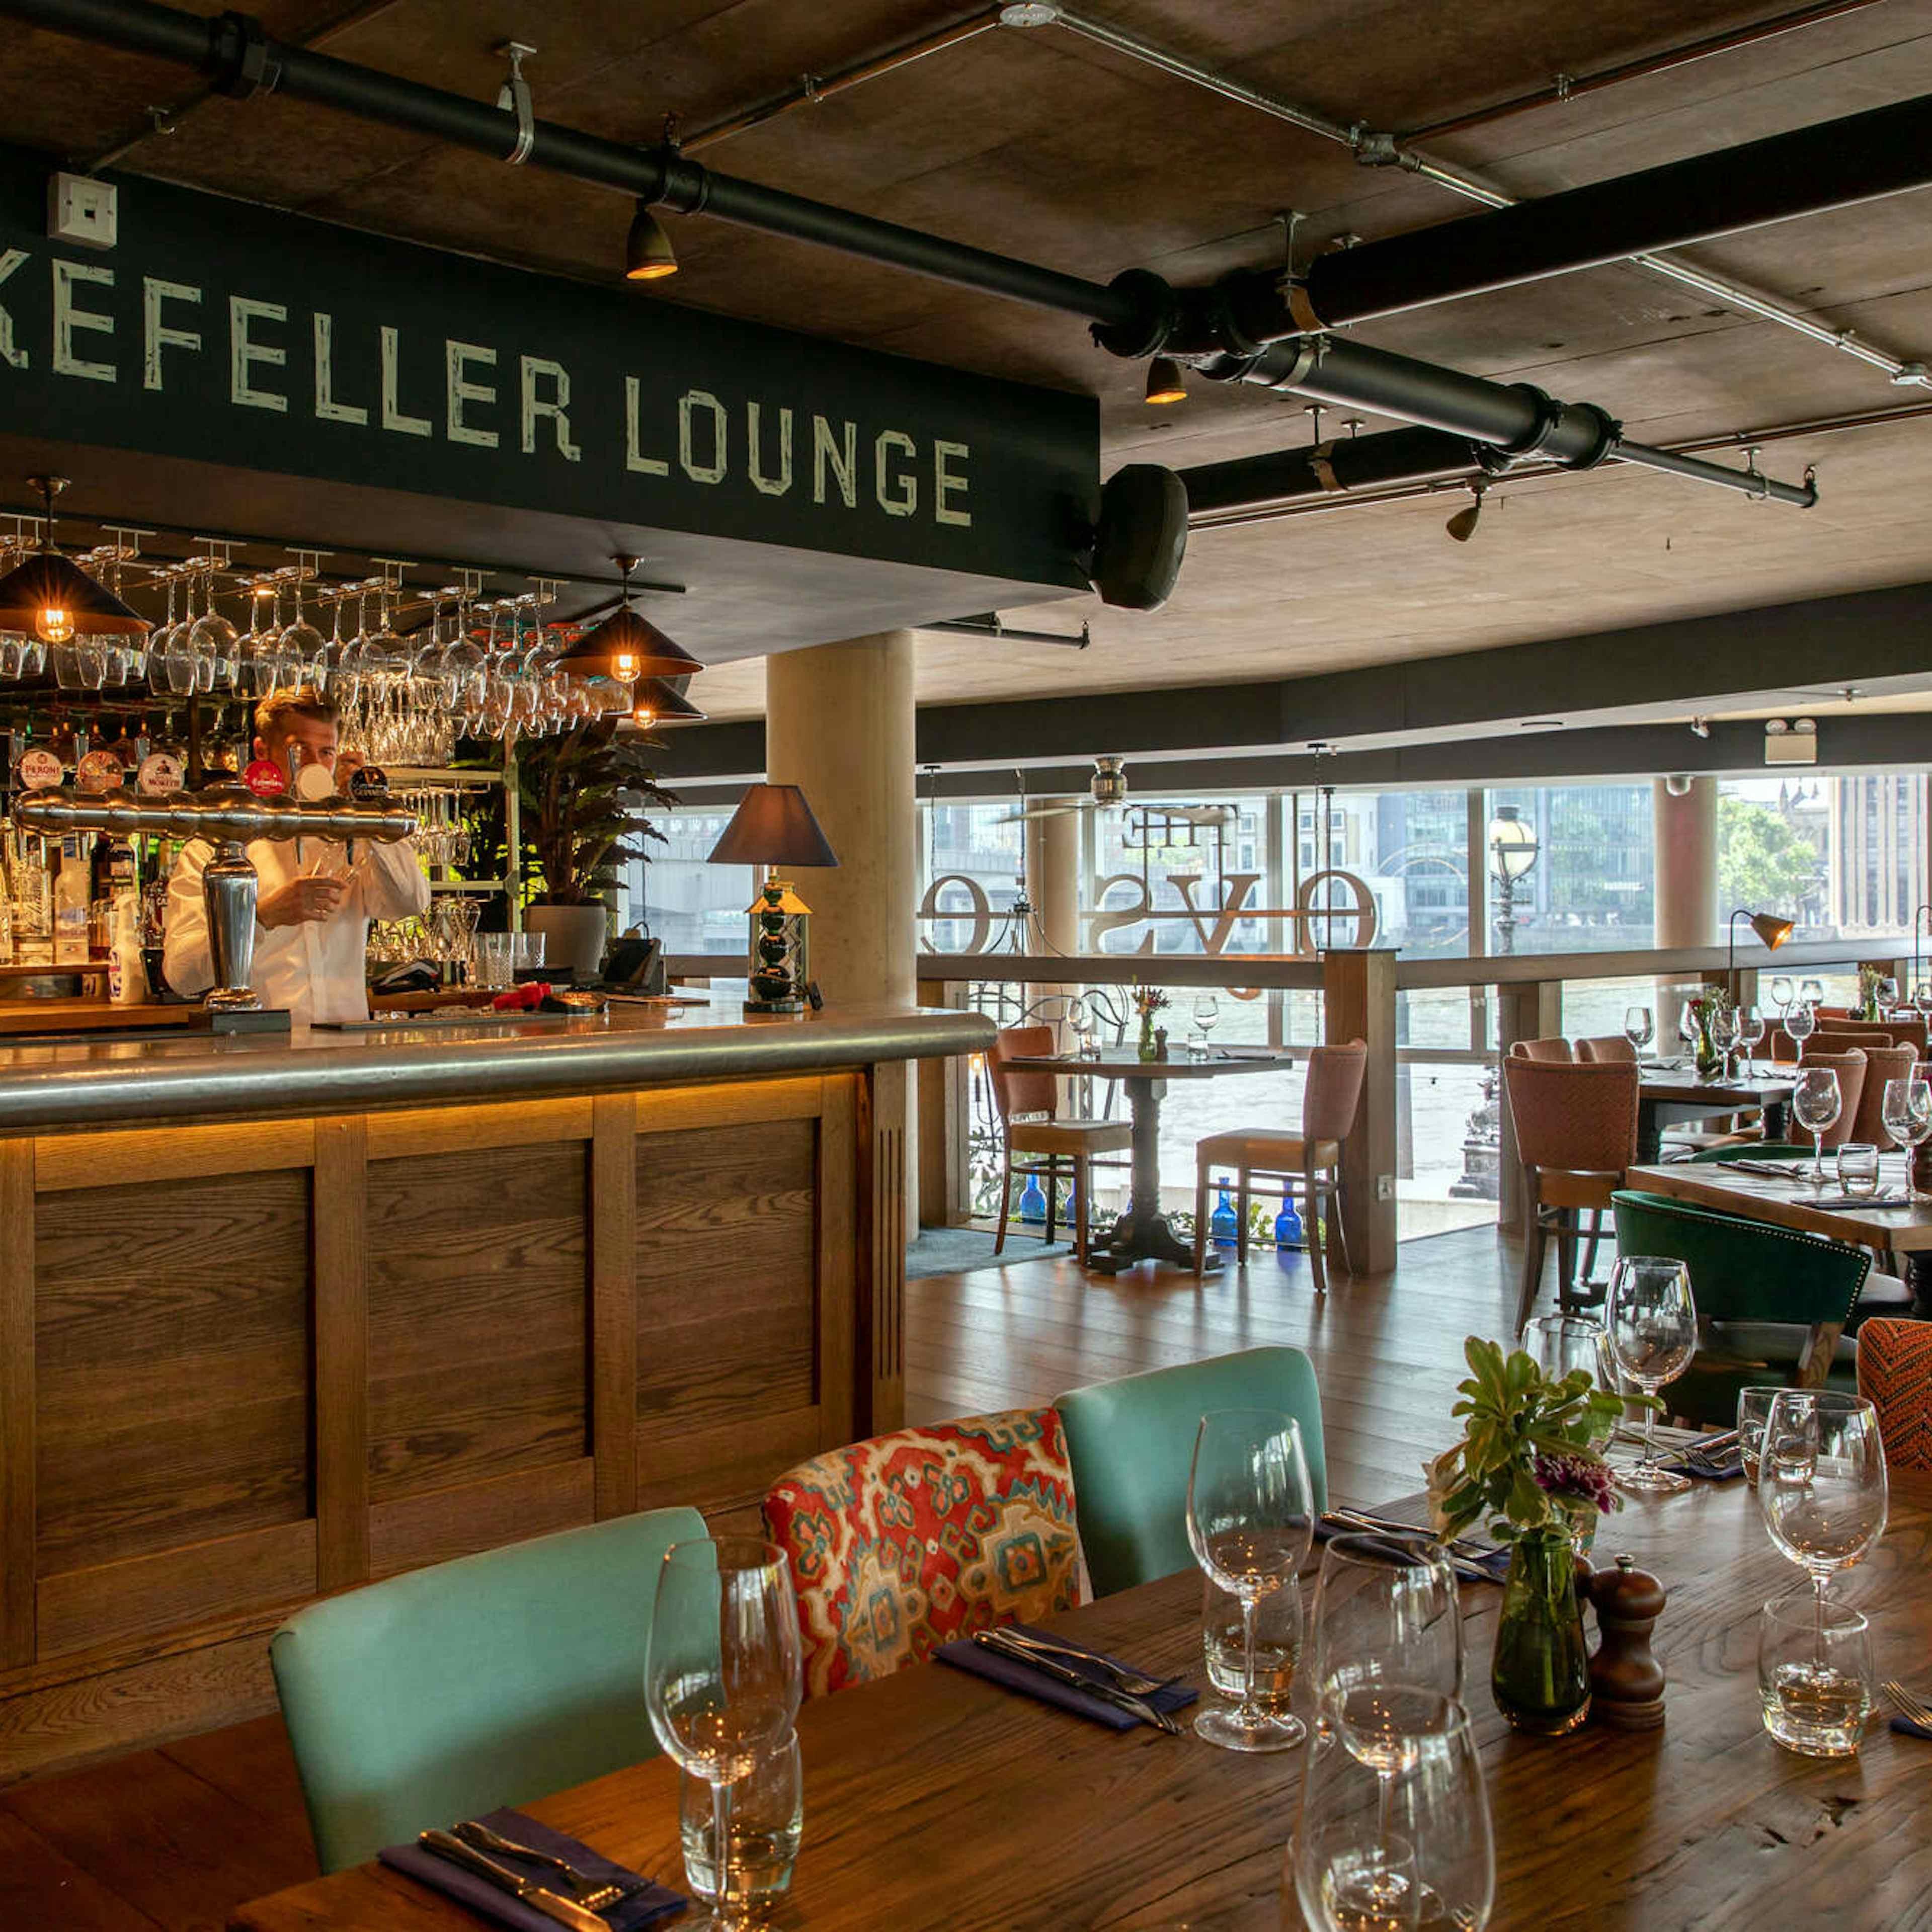 The Oyster Shed - The Rockefeller Lounge image 2